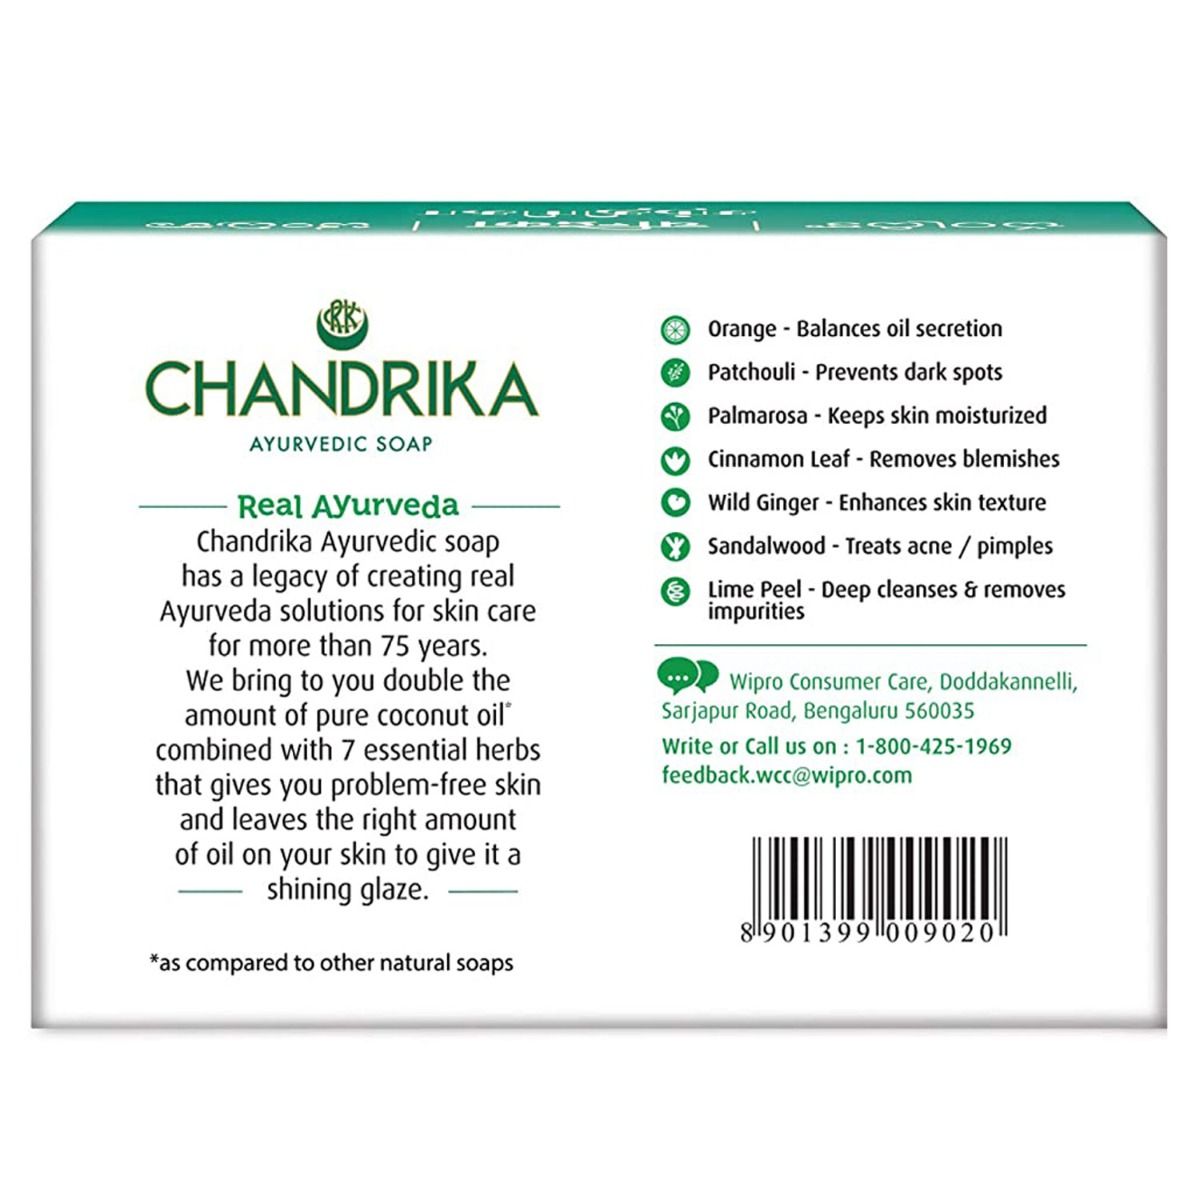 Chandrika Ayurvedic Soap, 75 gm Price, Uses, Side Effects, Composition -  Apollo Pharmacy